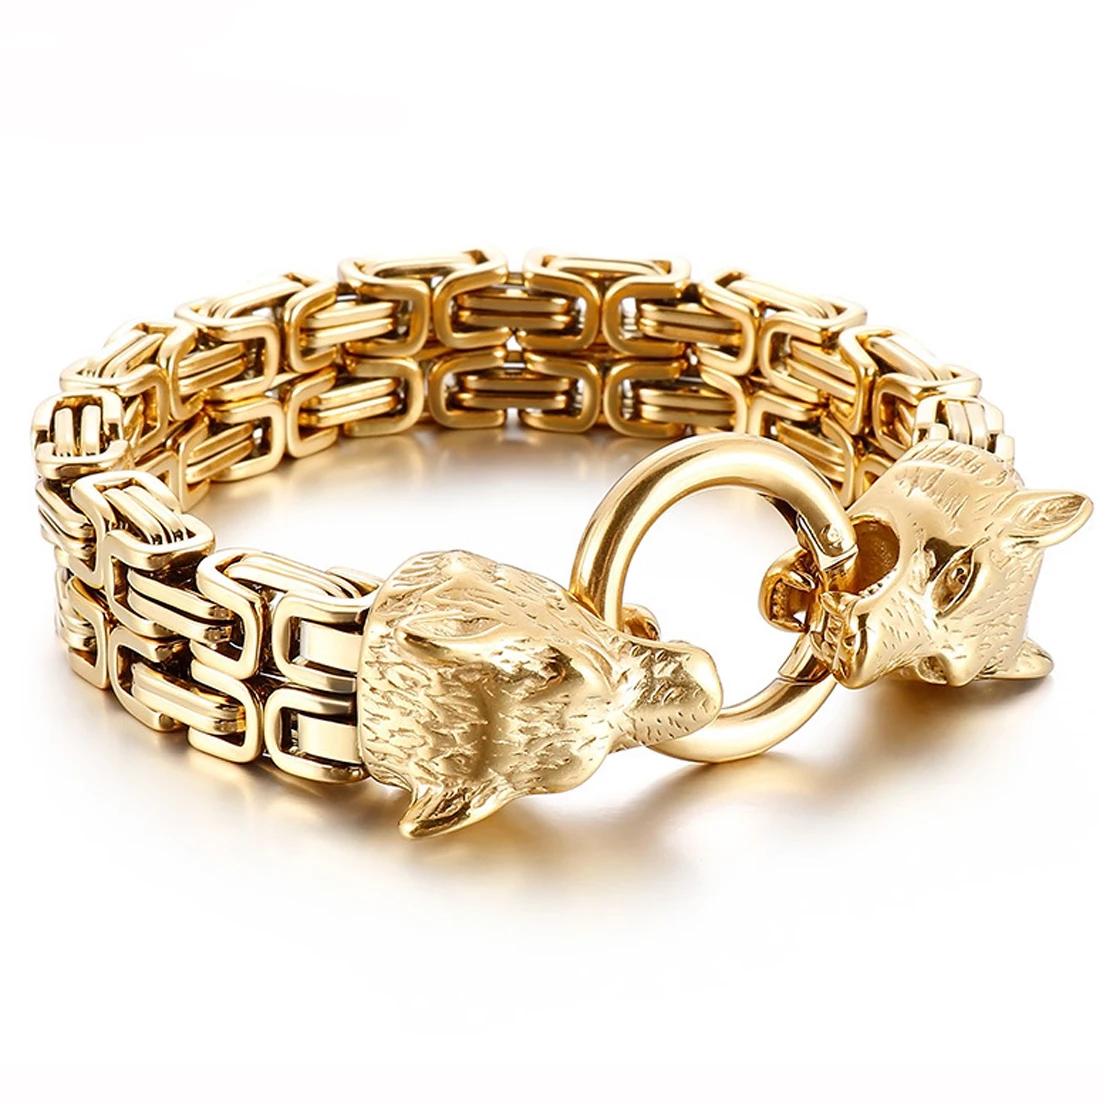 

Granny Chic Men's Gold Tone 316L Stainless Steel Royal Byzantine Box Chain Wolf Head Buckle Bracelet Bangle 7mm 19-21cm